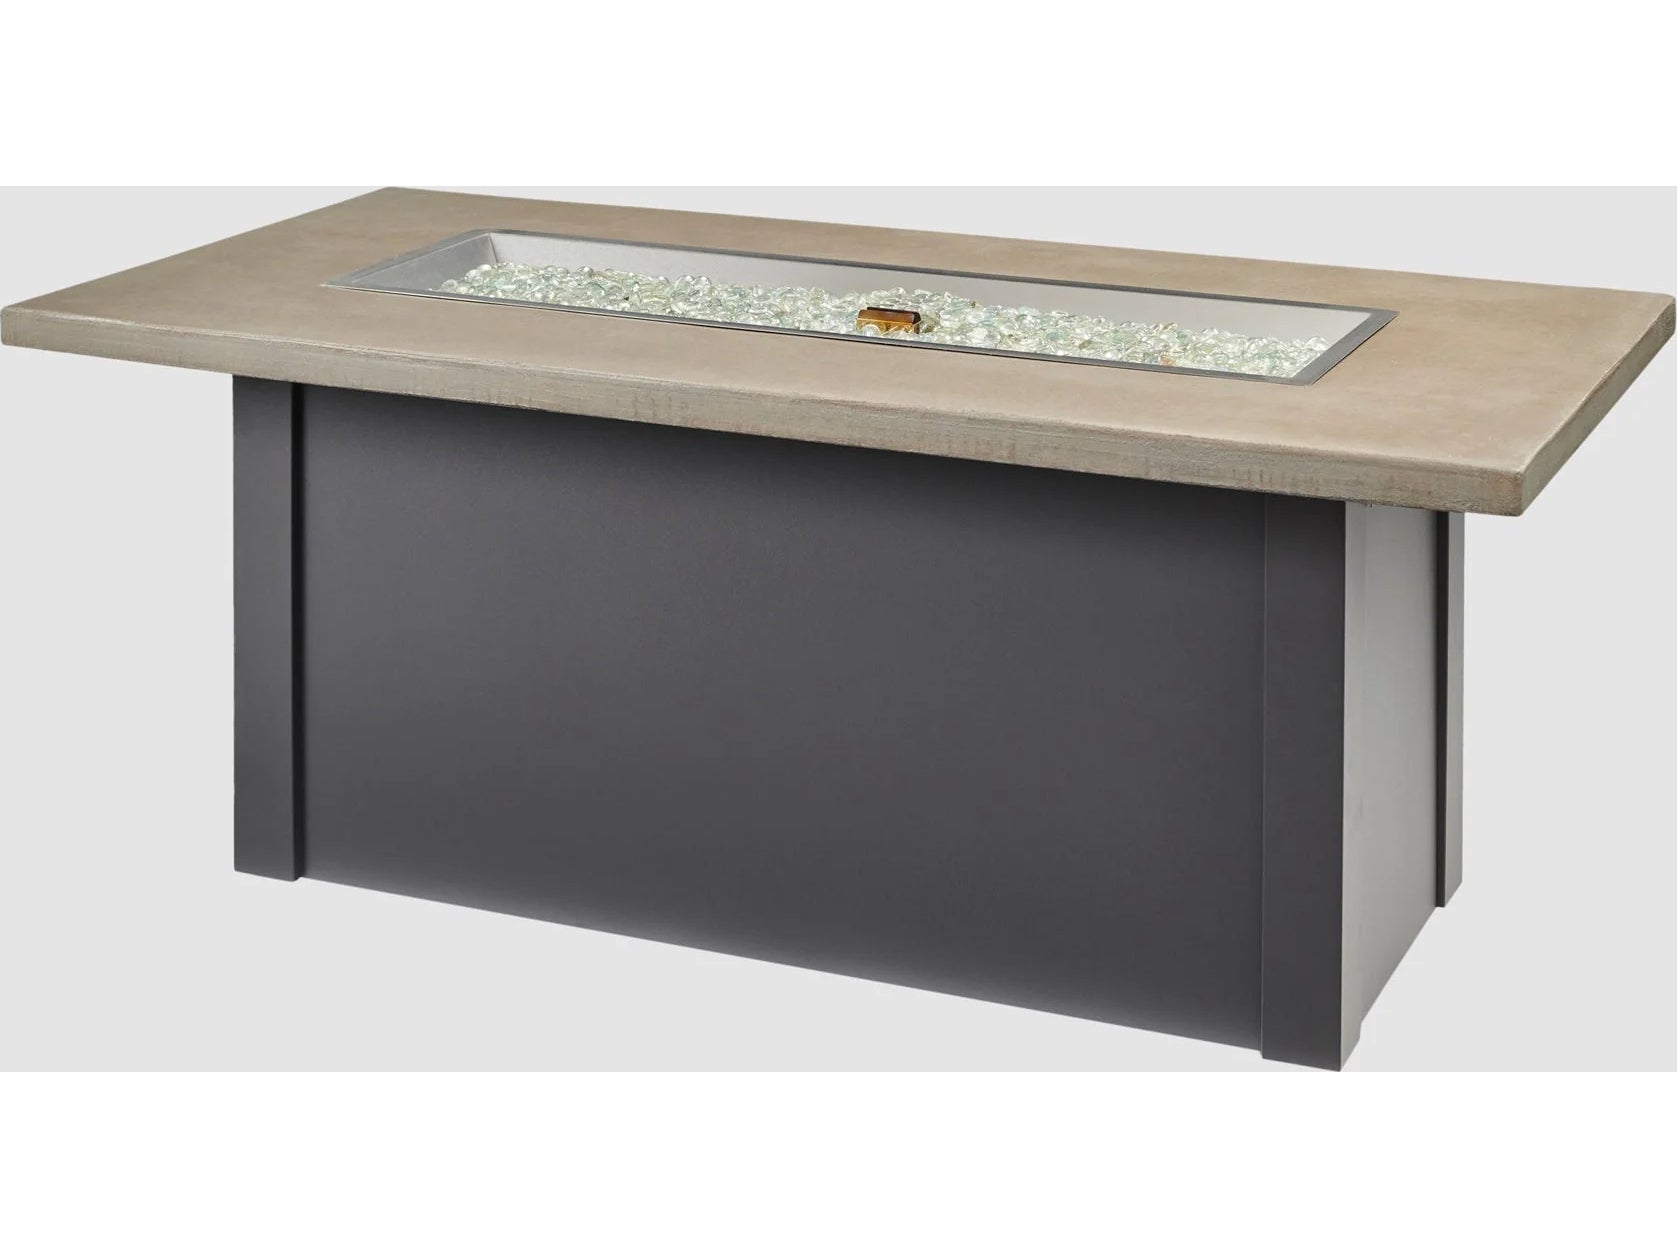 Outdoor Greatroom - 62’‘W x 30’'D - Havenwood Steel Graphite Grey Rectangular Pebble Grey Everblend Top Gas Fire Pit Table with Direct Spark Ignition